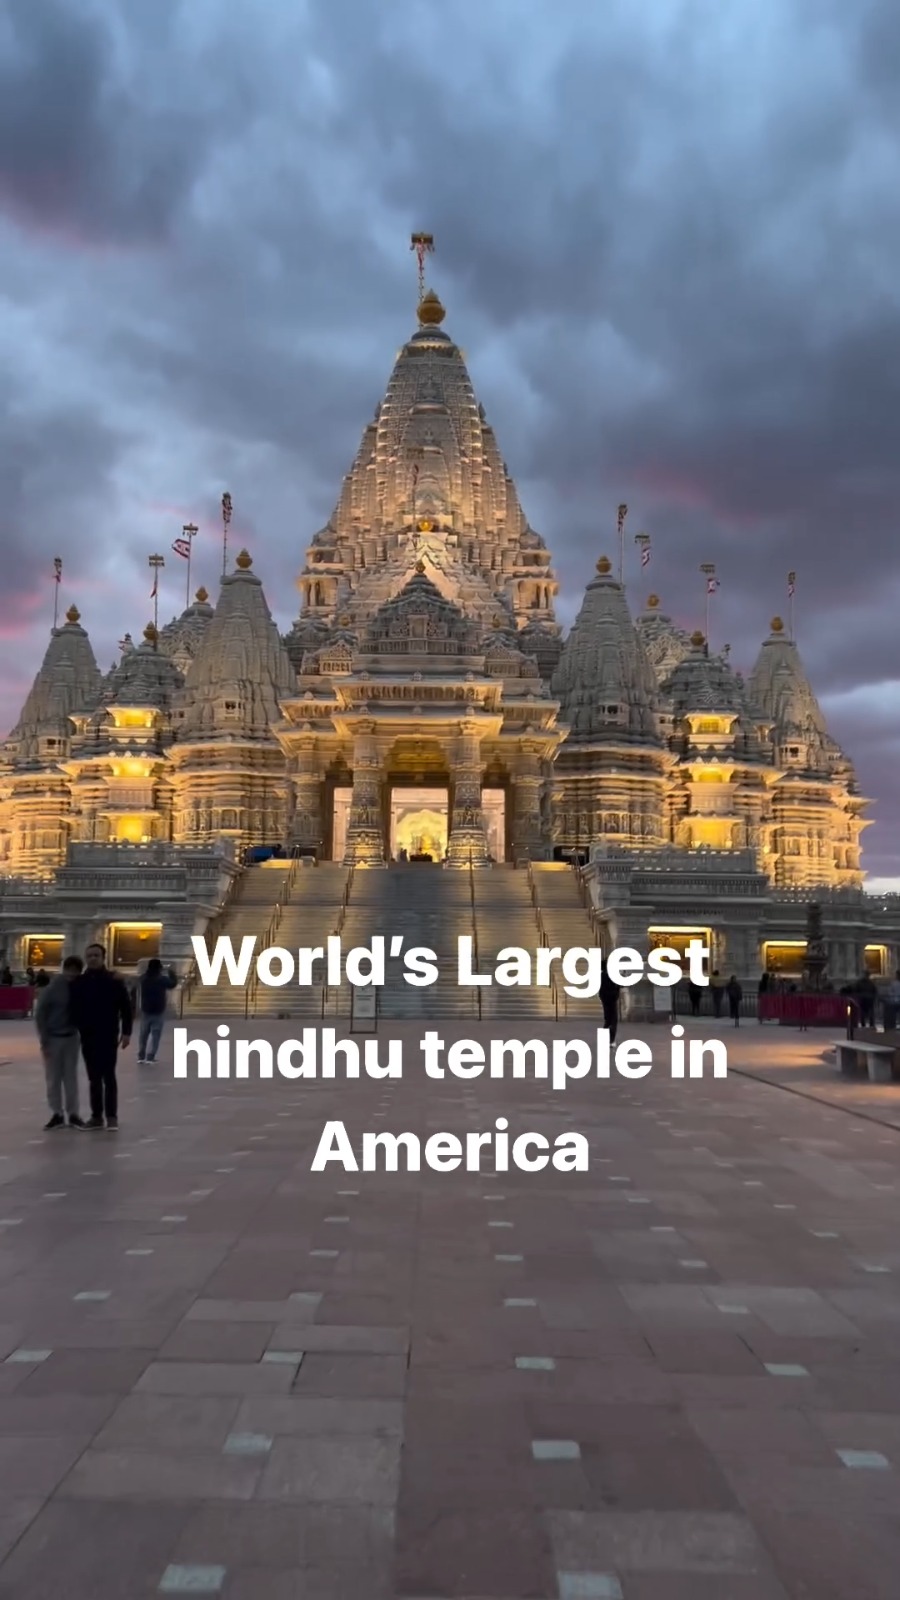 World’s largest hindhu temple in America